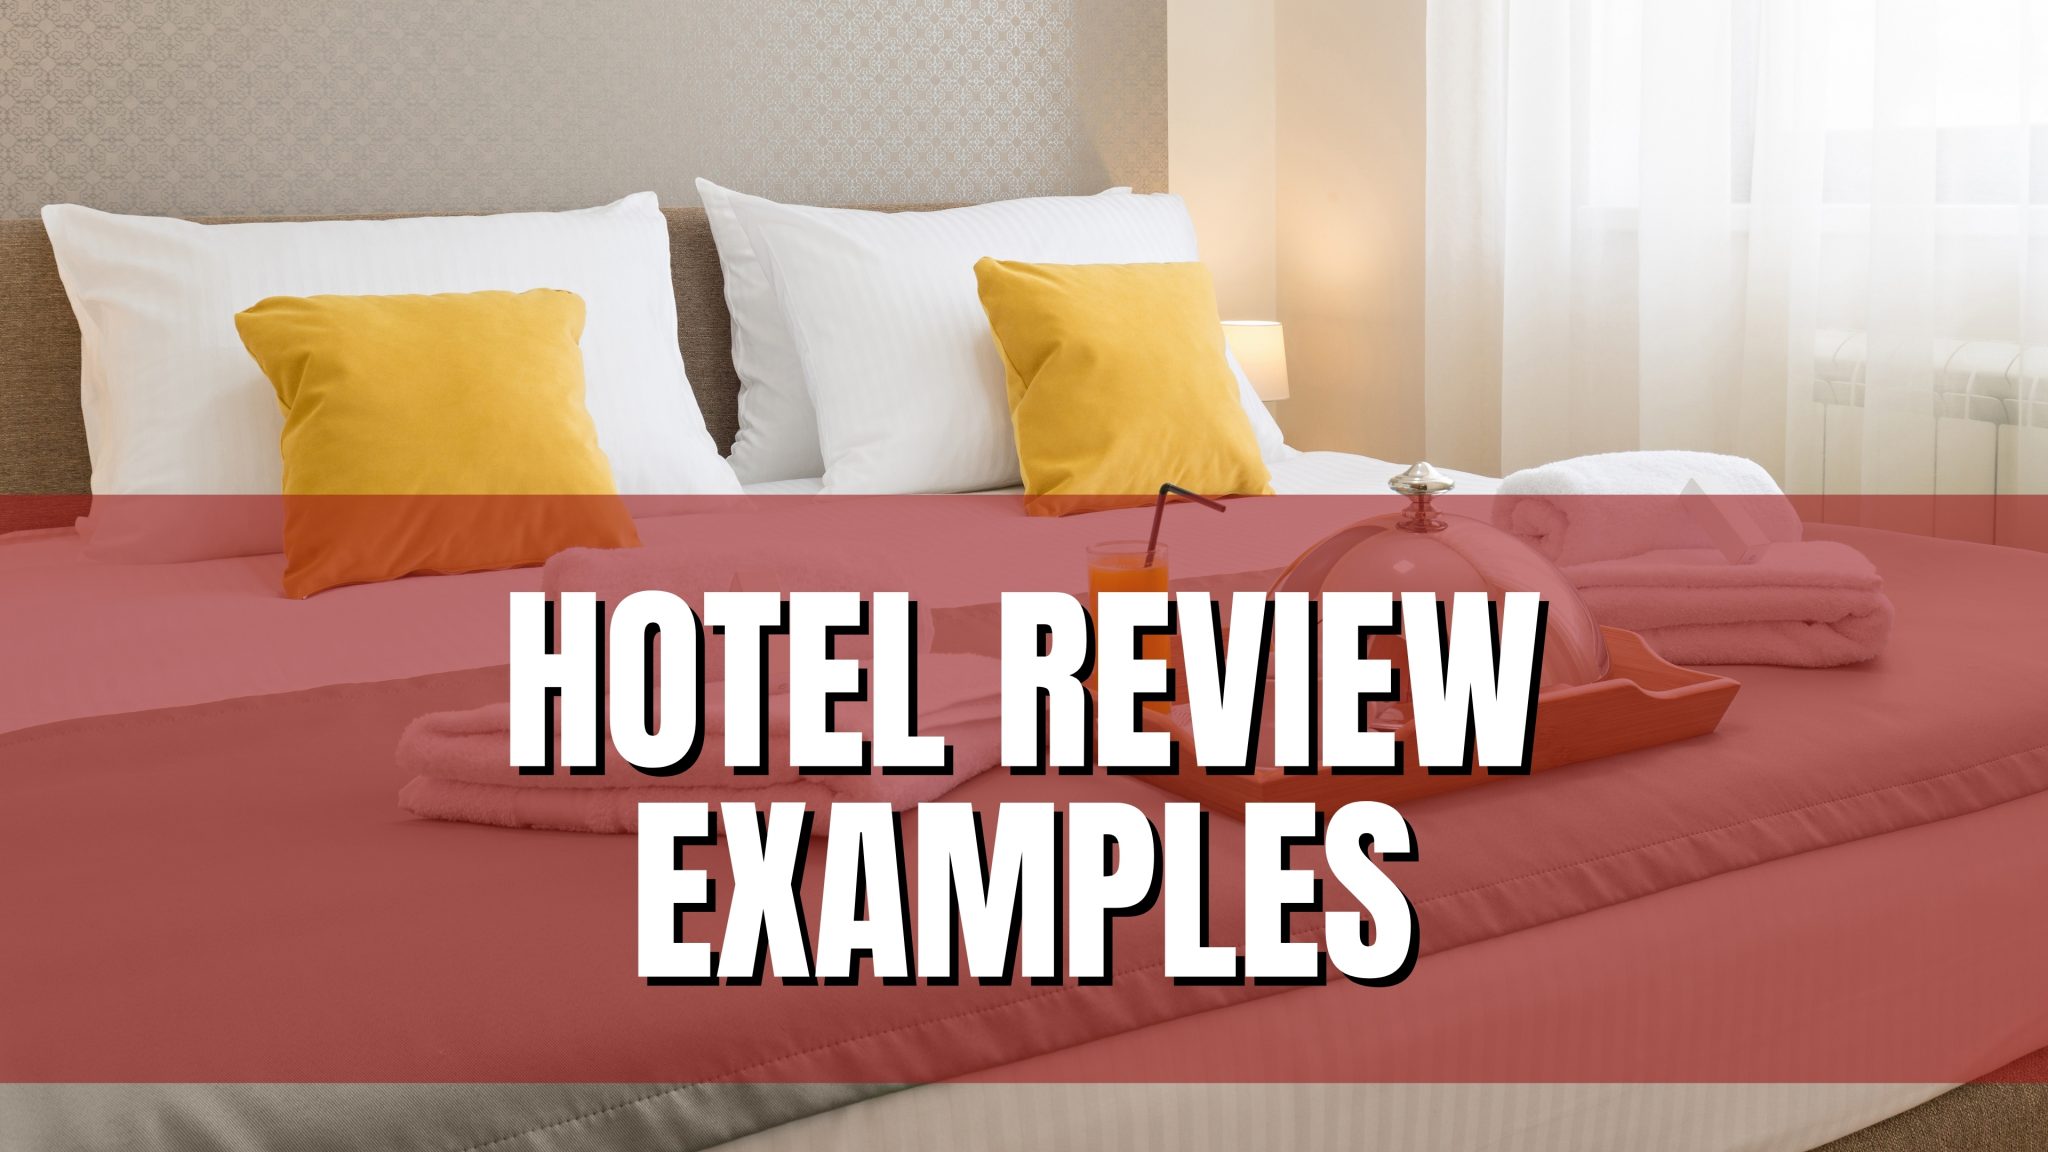 Hotel review Examples